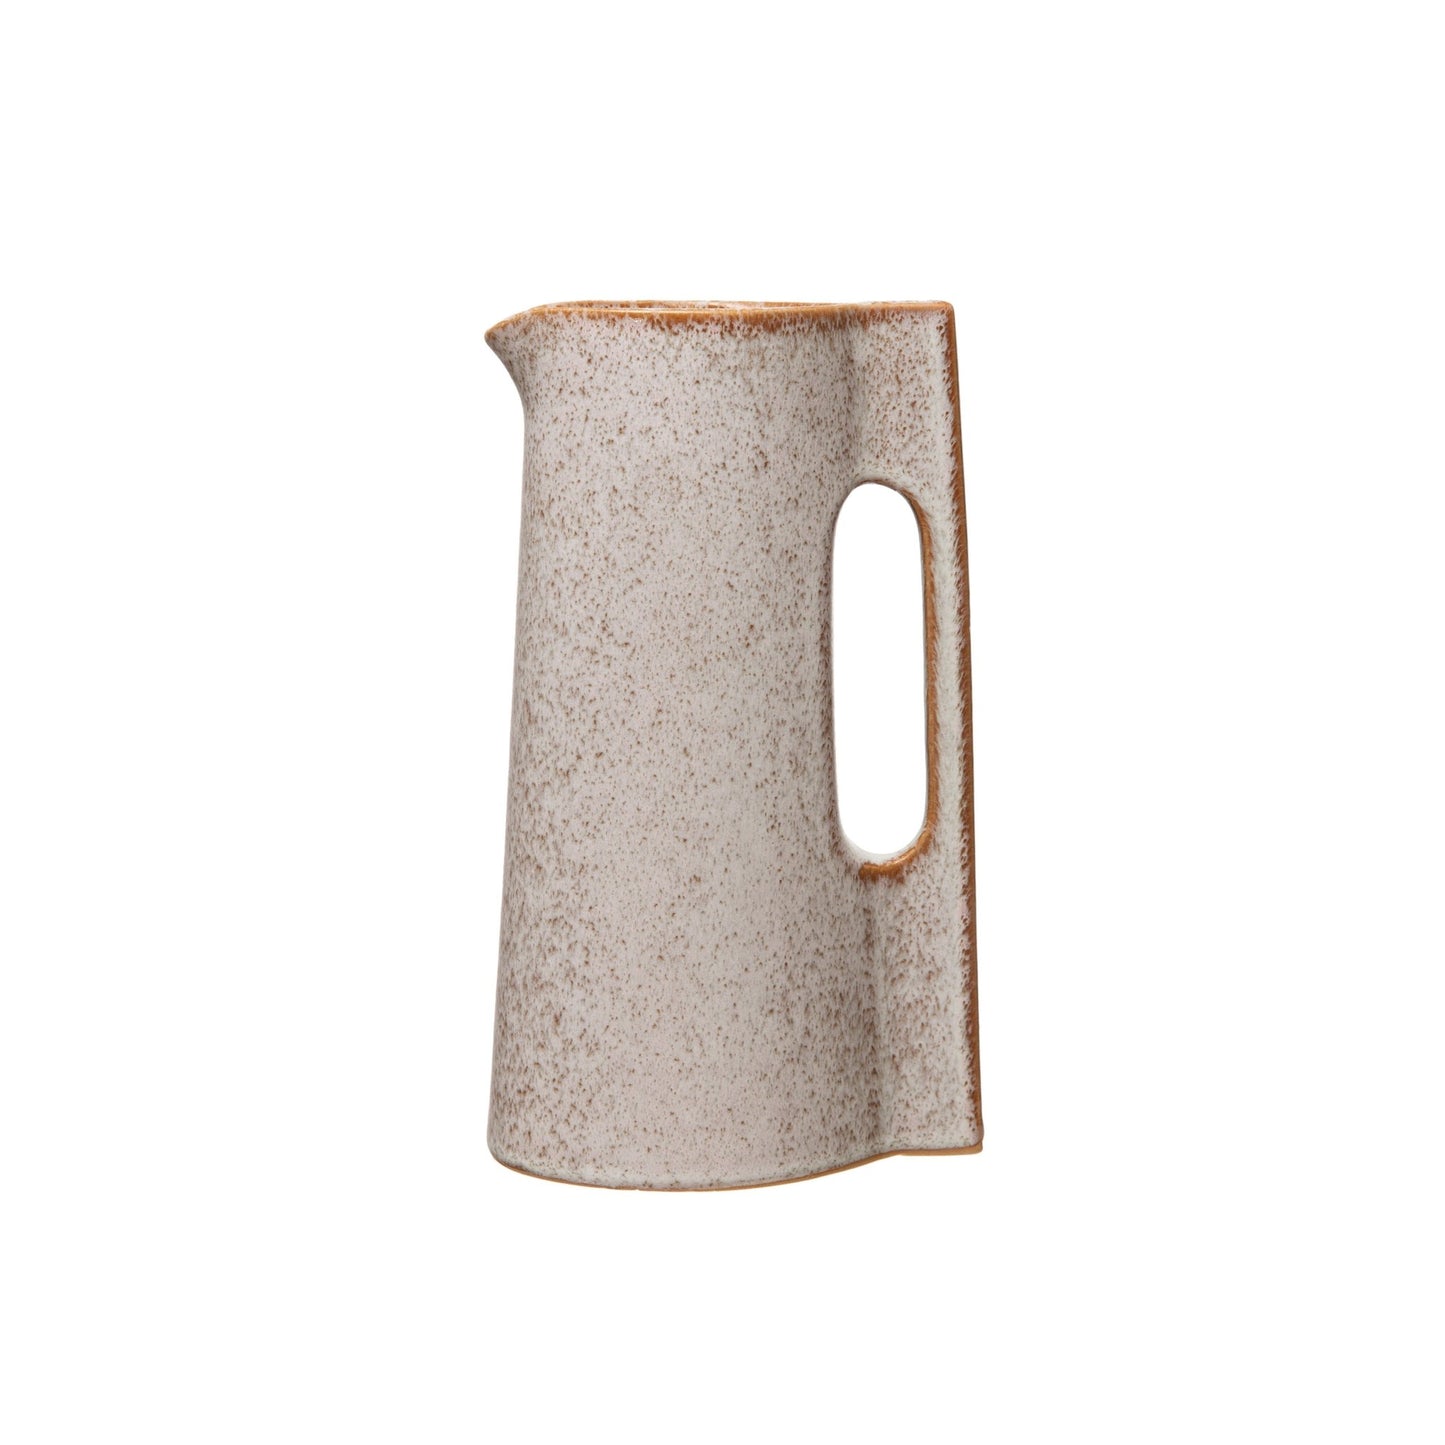 The Abby Stoneware Pitcher